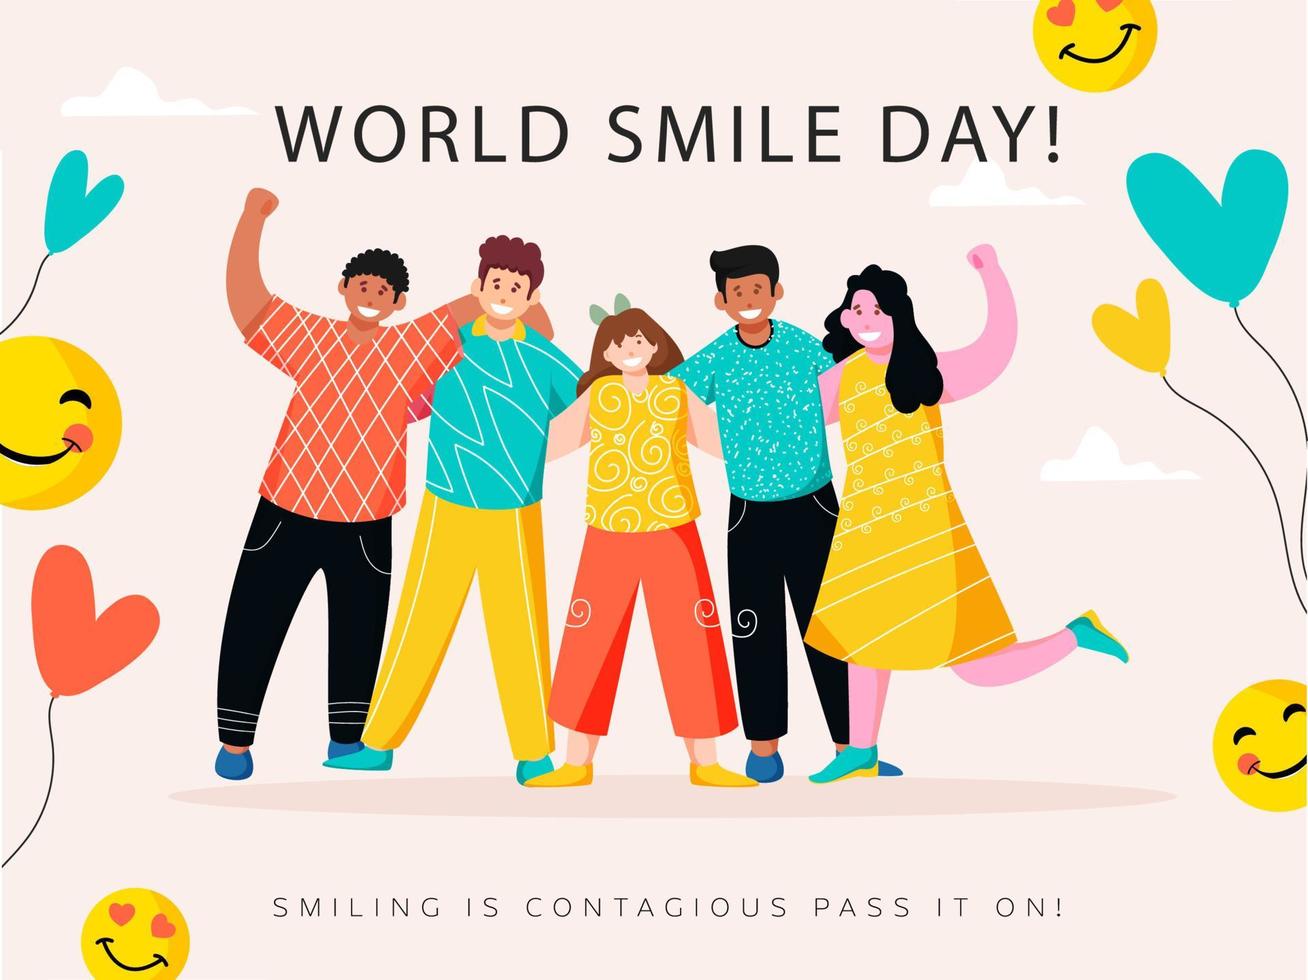 Group of Cheerful Young Boys and Girls Standing Together with Given Message Smiling Is Contagious Pass It On for World Smile Day. vector